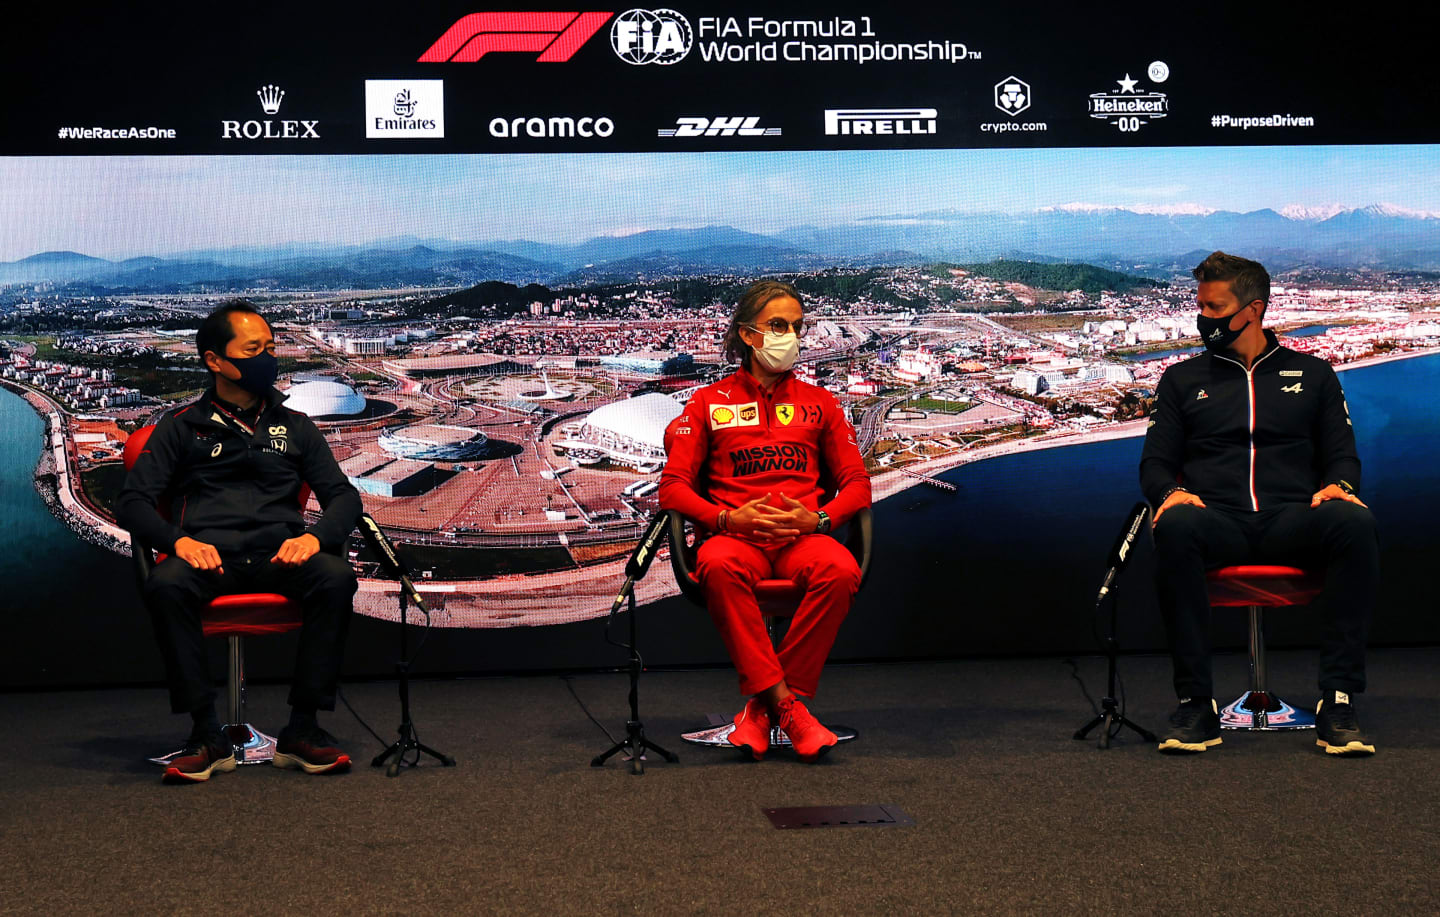 SOCHI, RUSSIA - SEPTEMBER 24: Toyoharu Tanabe of Honda, Laurent Mekies, Scuderia Ferrari Sporting Director and Marcin Budkowski, Executive Director of Alpine F1 Team talk in the Team Principals Press Conference during practice ahead of the F1 Grand Prix of Russia at Sochi Autodrom on September 24, 2021 in Sochi, Russia. (Photo by XPB - Pool/Getty Images)